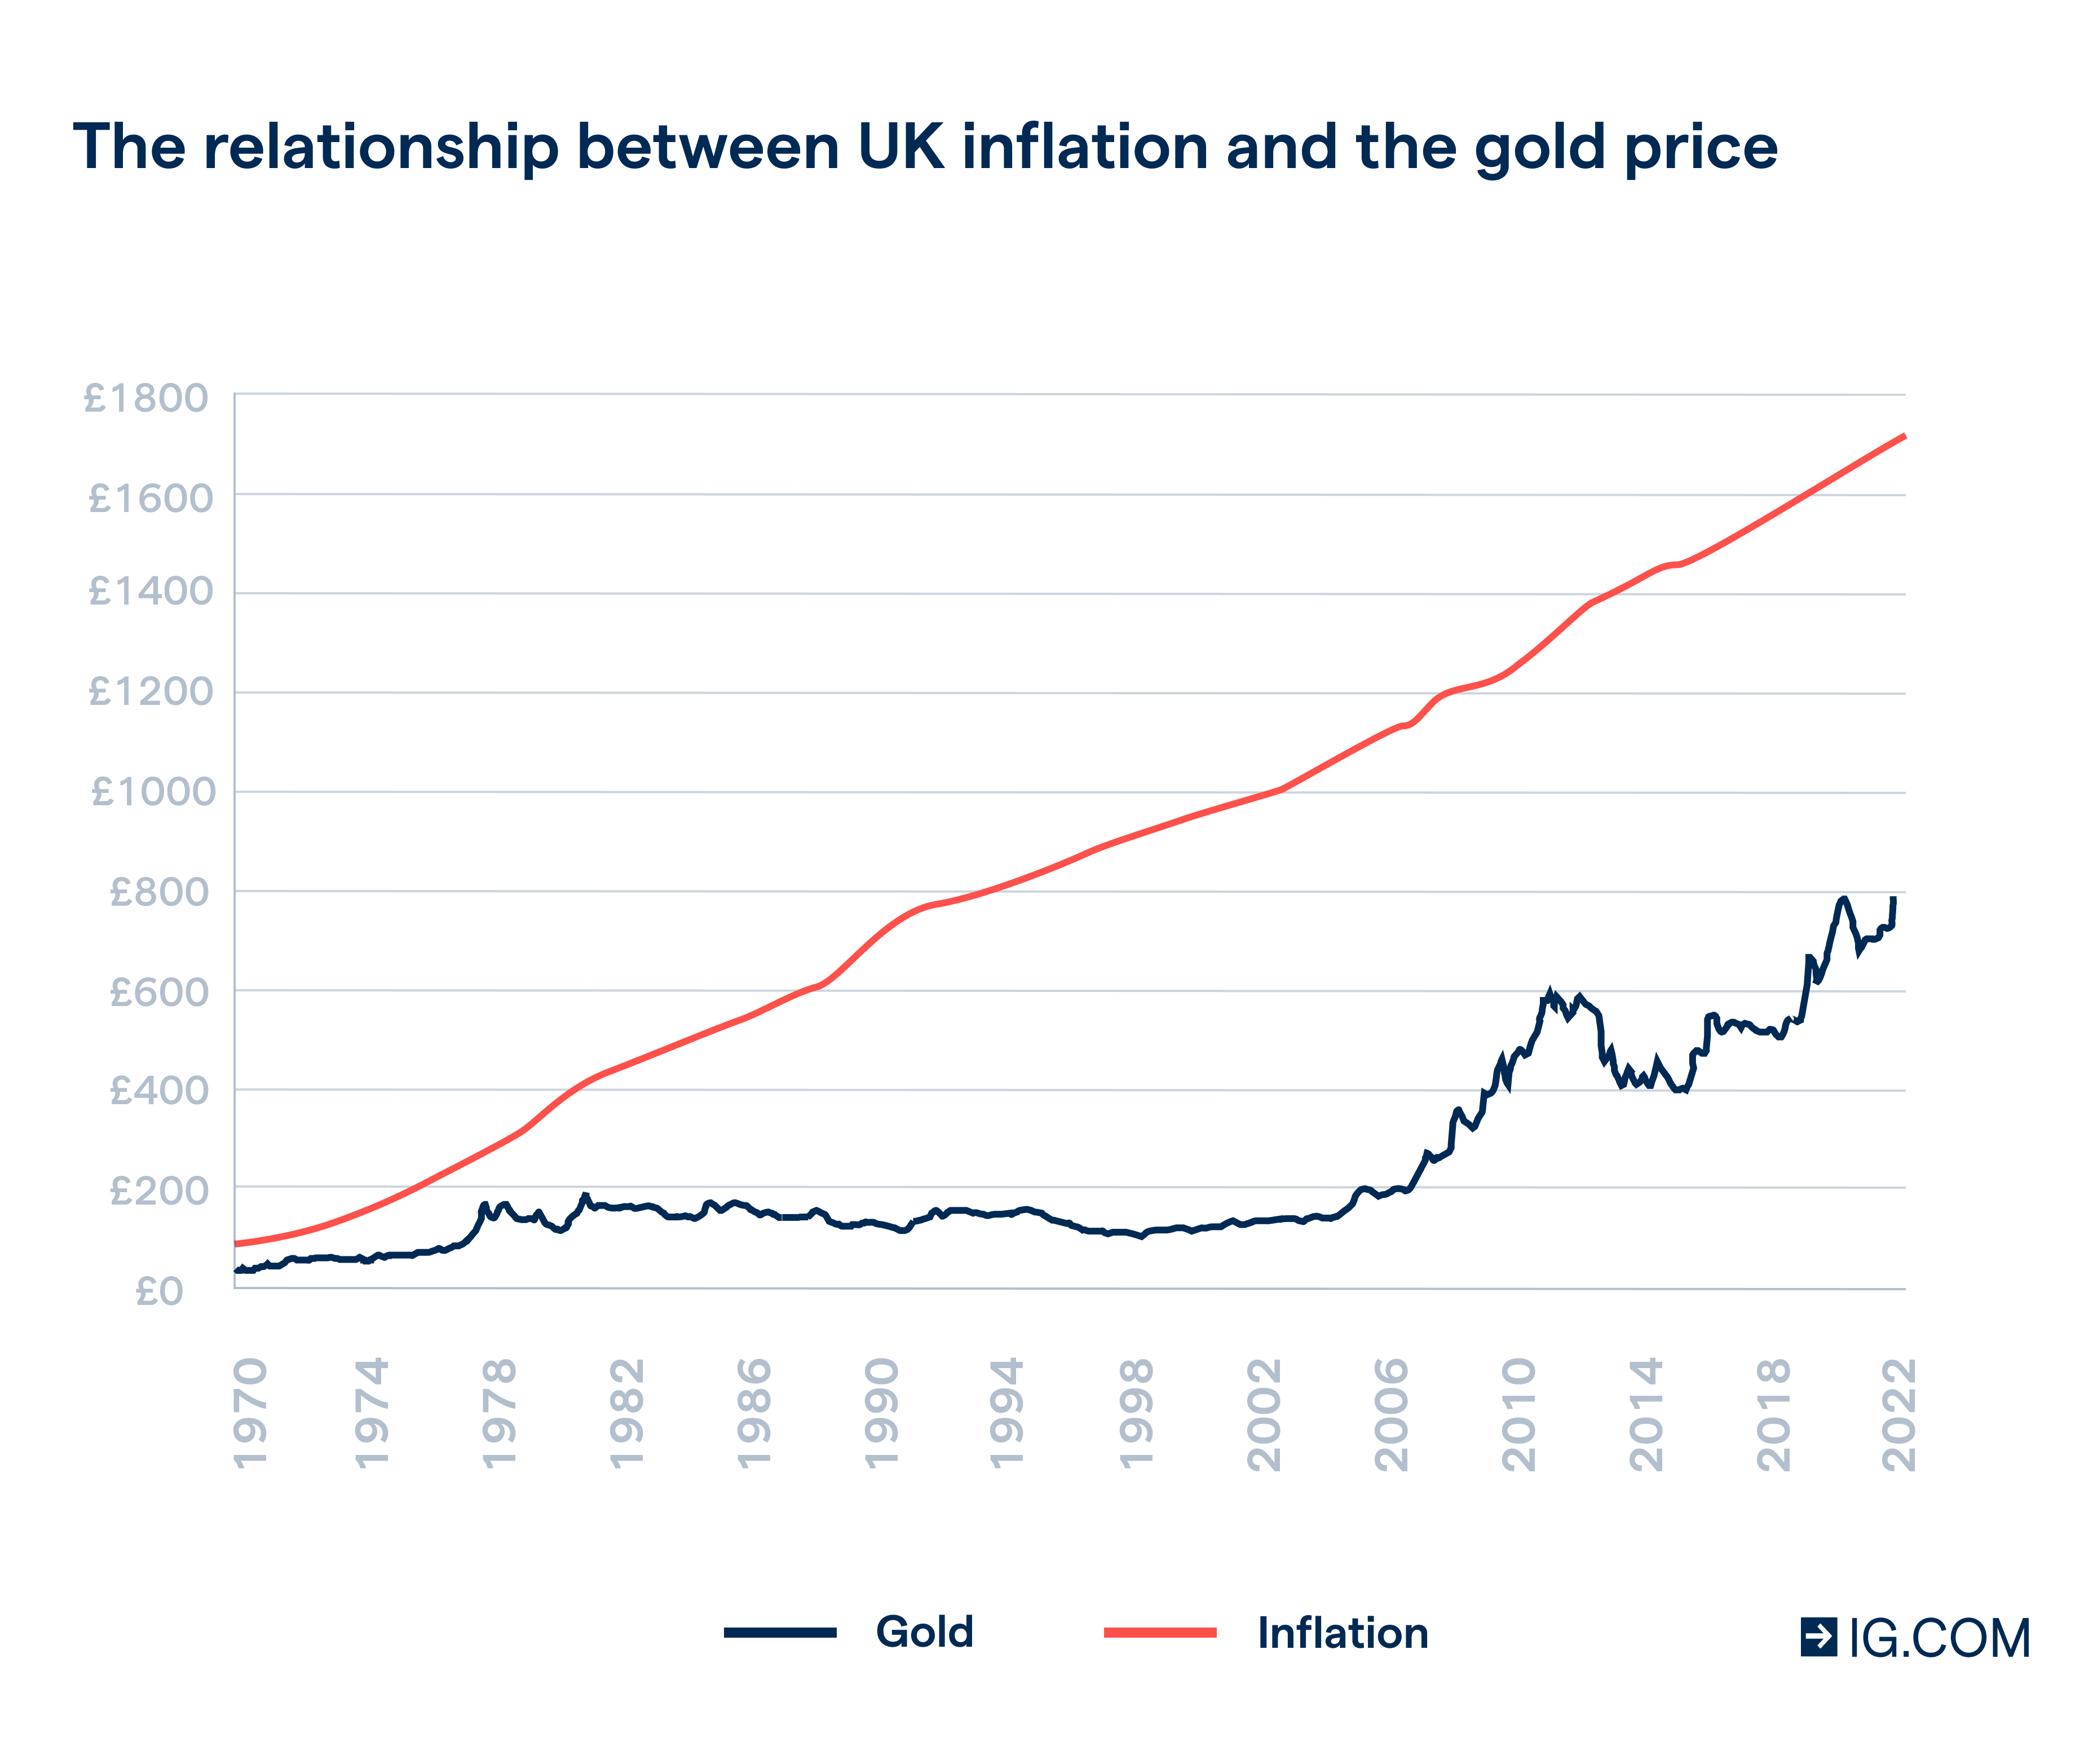 The relationship between UK inflation and gold price